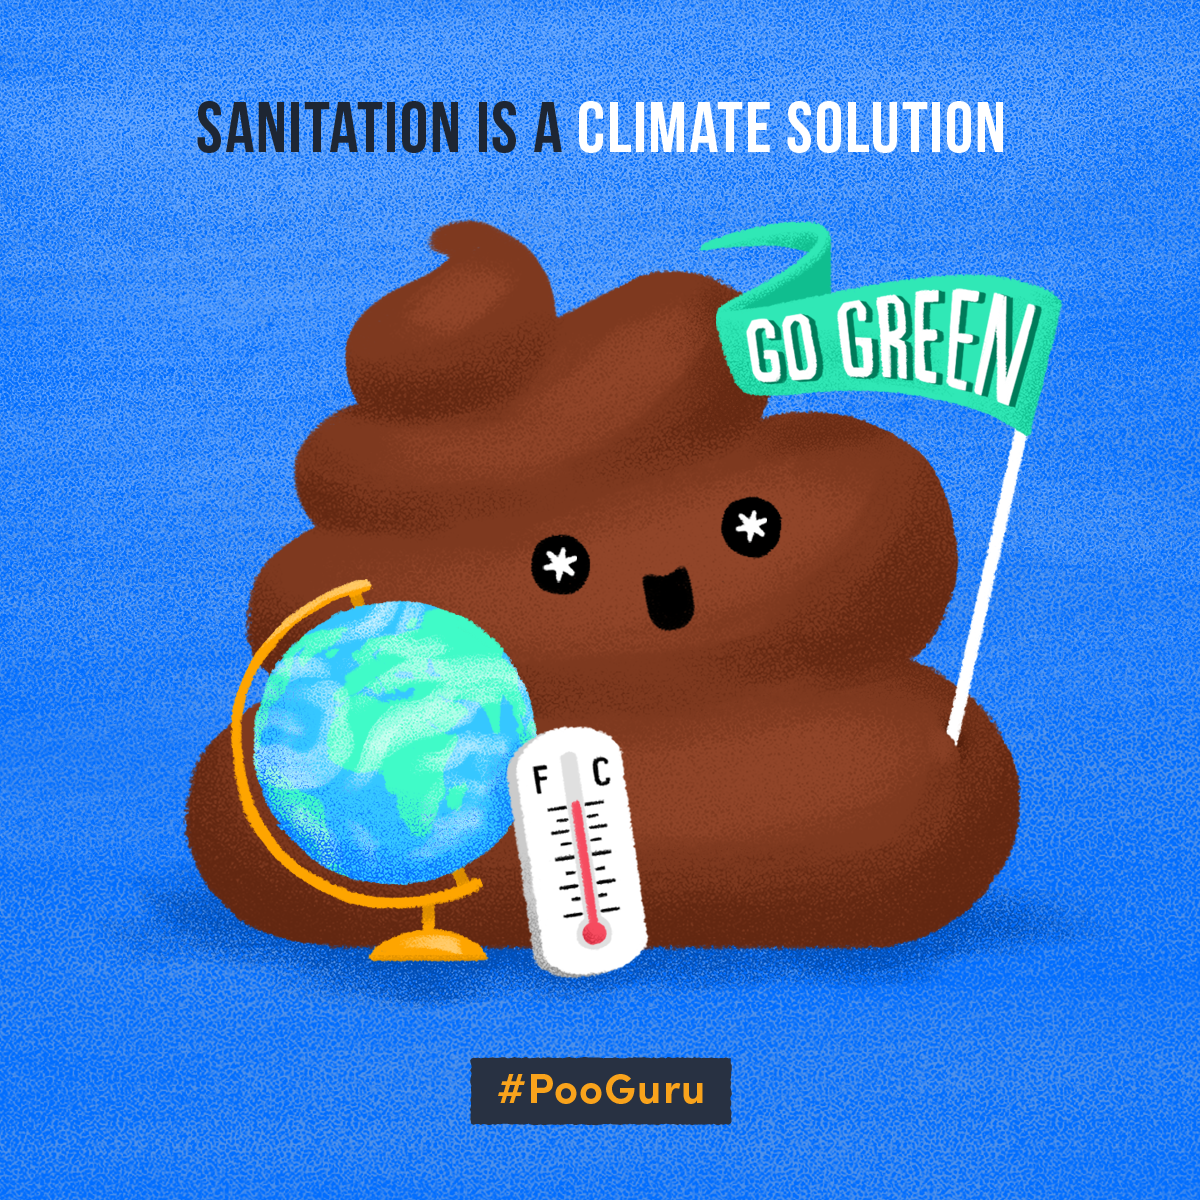 Sanitation is a climate solution